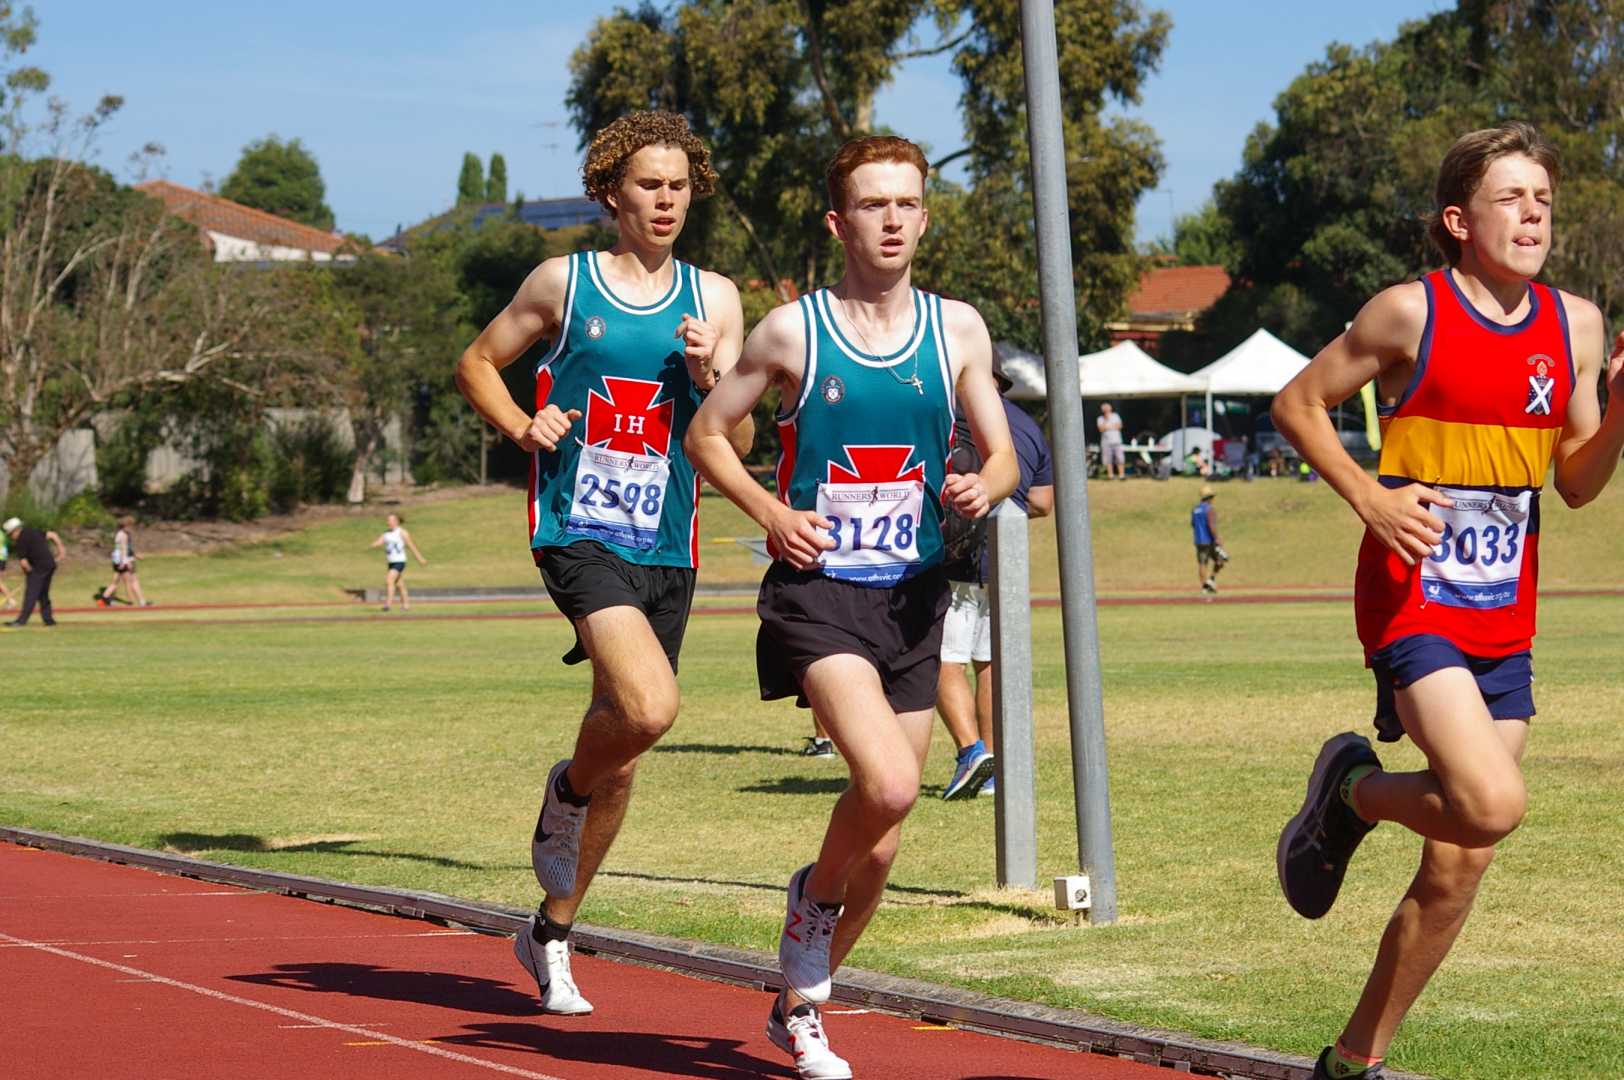 Two Ivanhoe runners in the 3000 metres